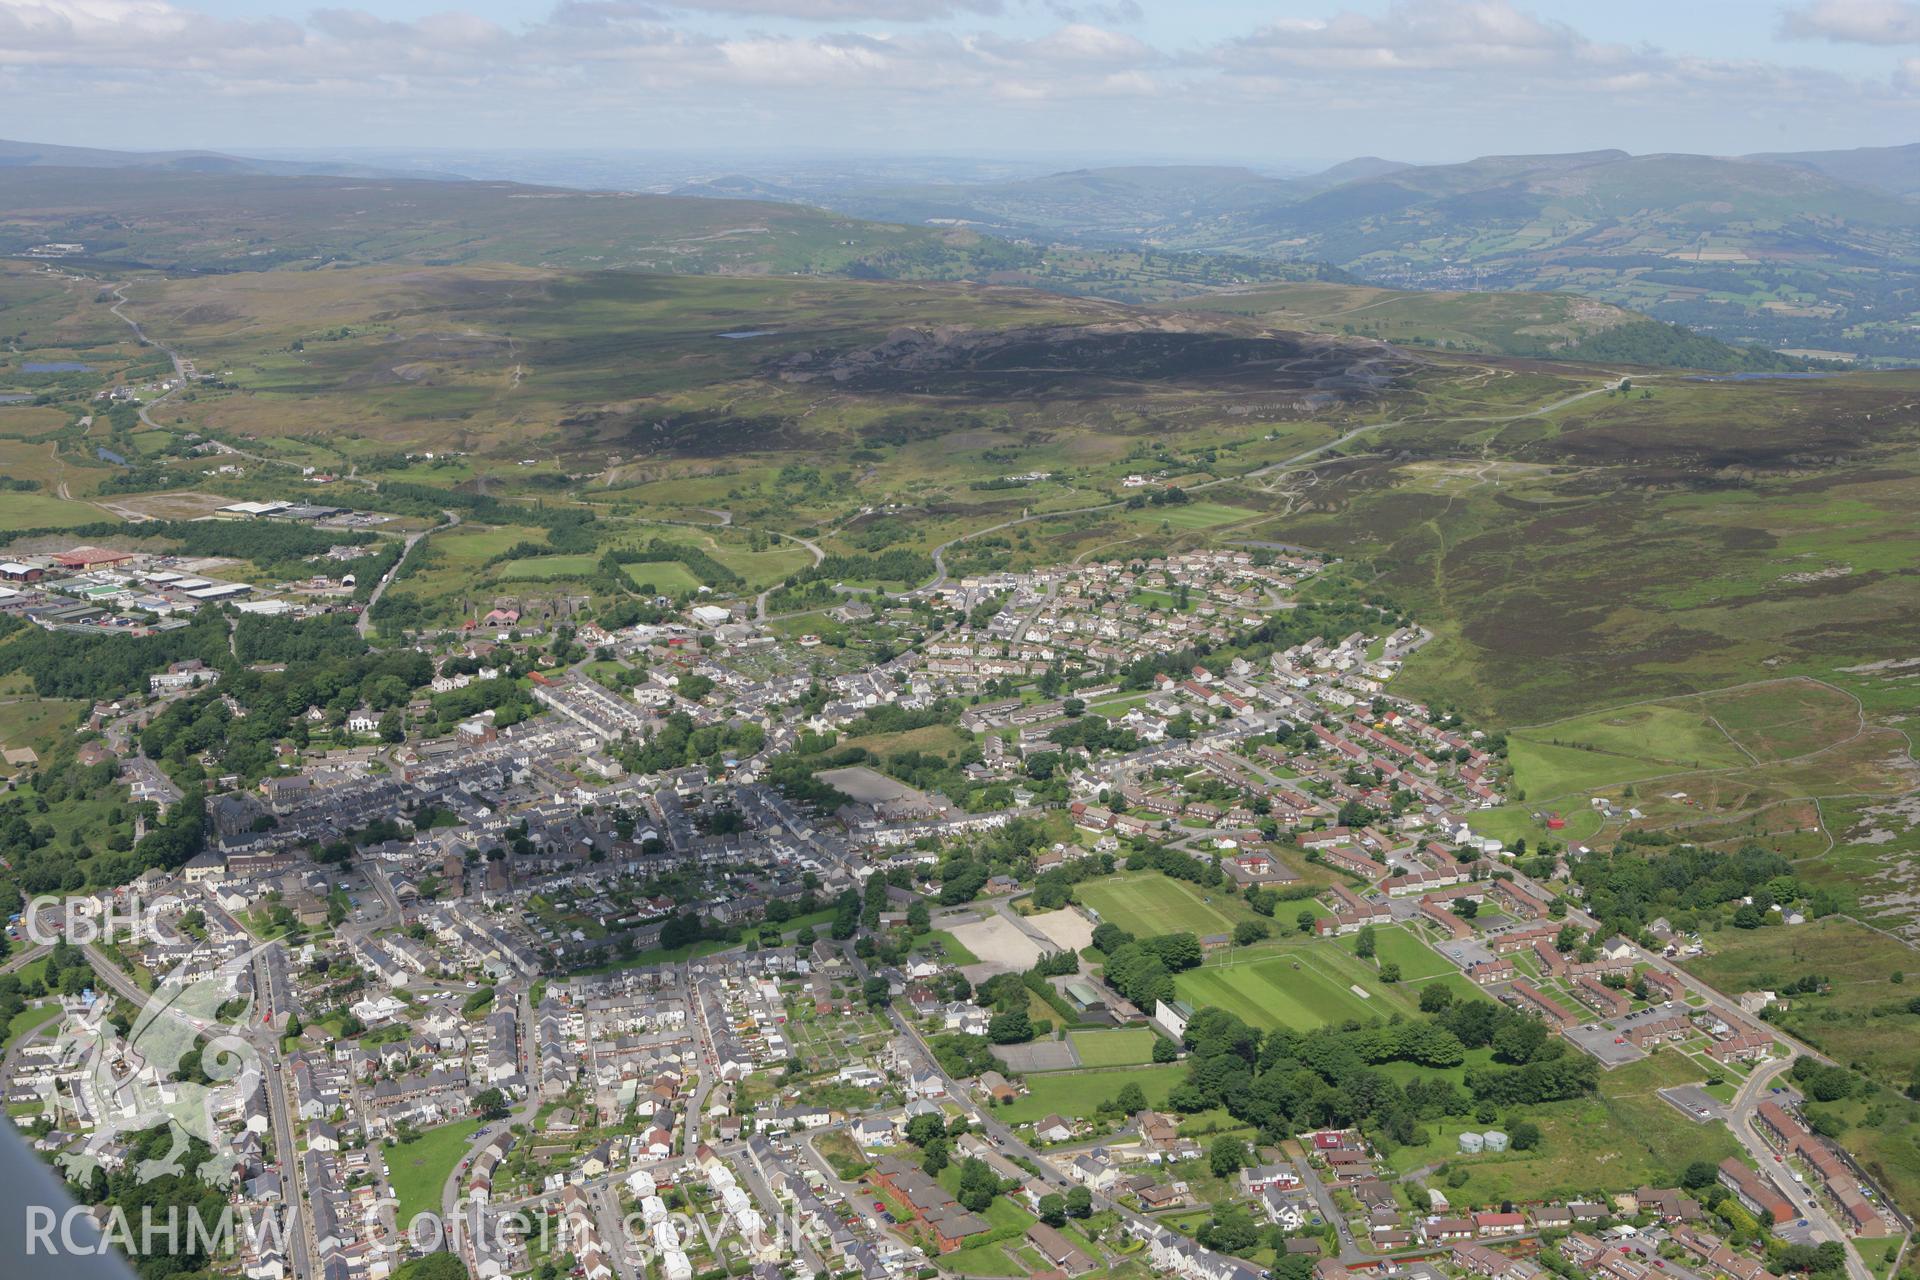 RCAHMW colour oblique photograph of Blaenavon townscape, from the north-east. Taken by Toby Driver on 21/07/2008.